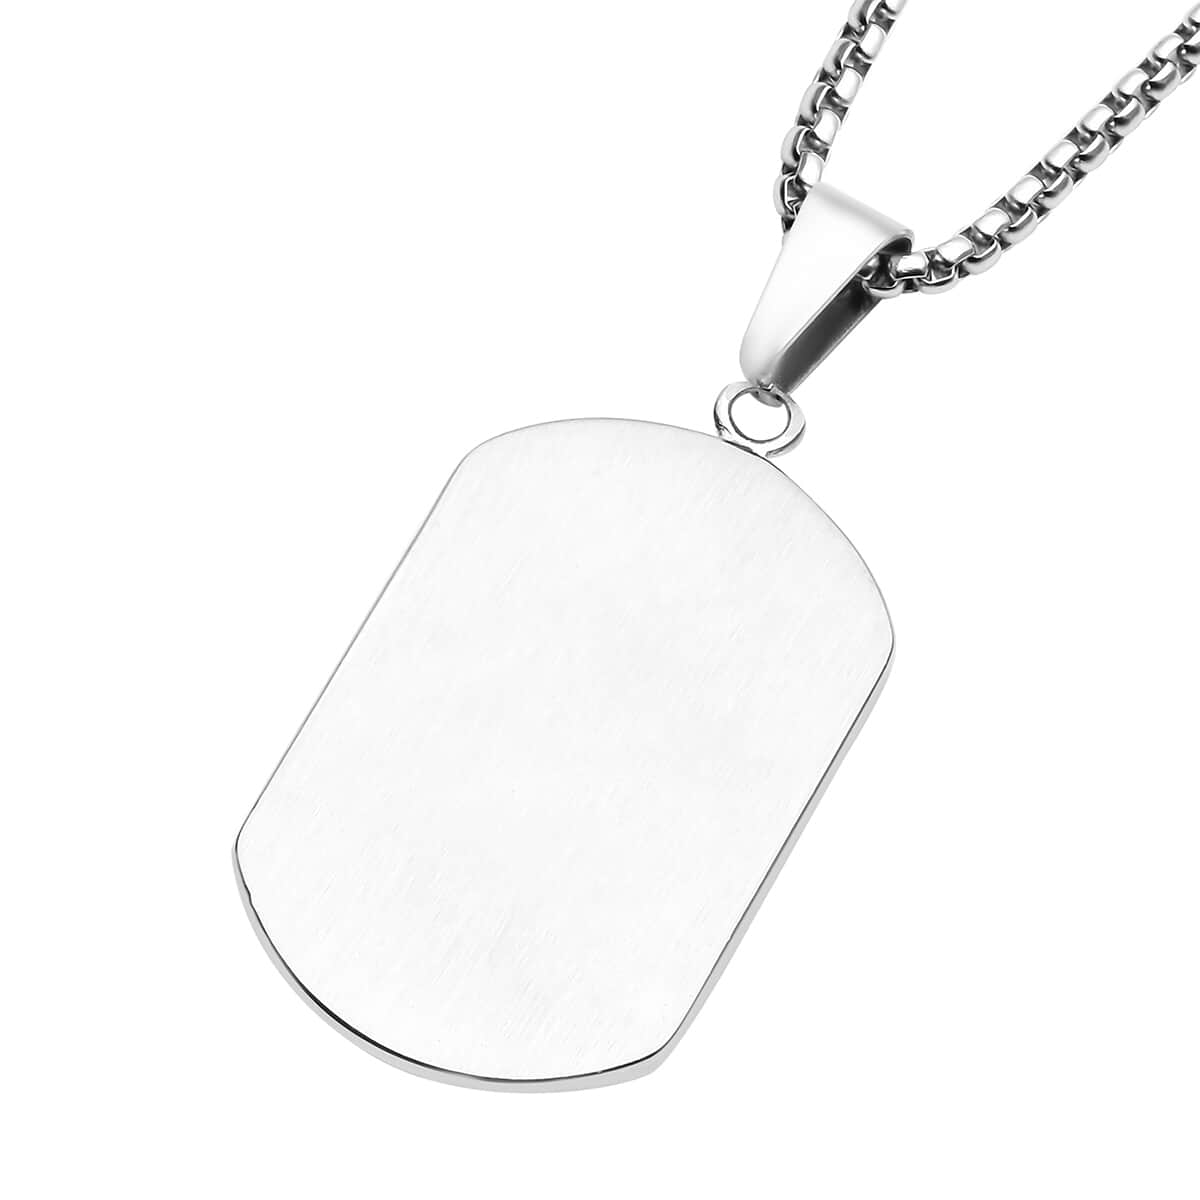 Taurus Dog Tag Jewelry Gift Box Pendant Necklace 23.5 Inches in ION Plated YG and Black Oxidized Stainless Steel image number 3